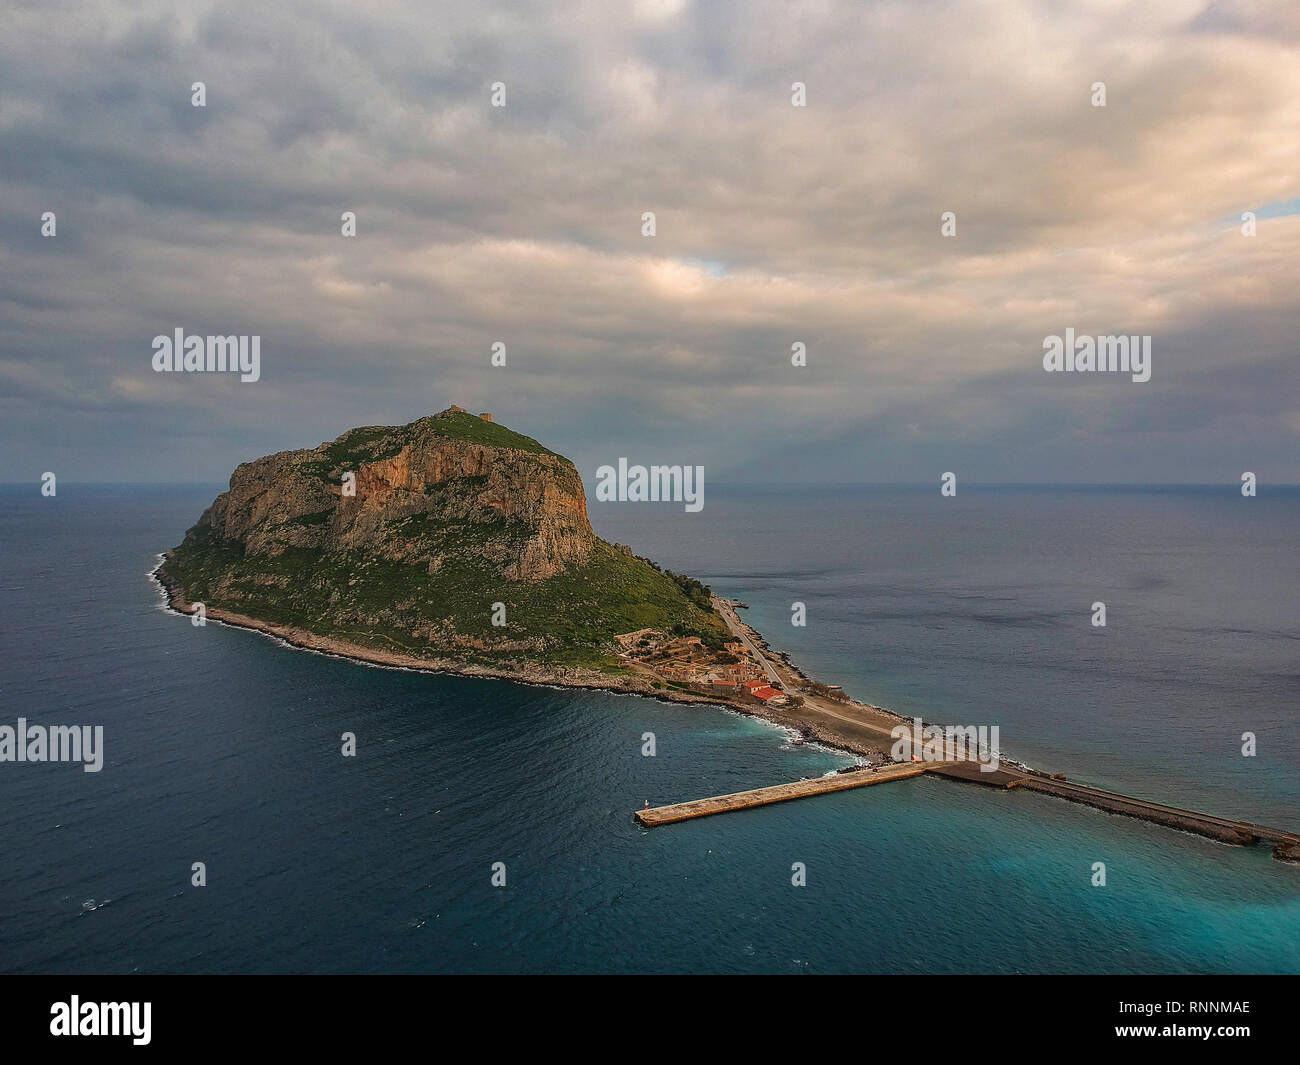 Aerial panoramic view of the ancient hillside town of Monemvasia located in the southeastern part of the Peloponnese peninsula - Majestic scenery. Stock Photo